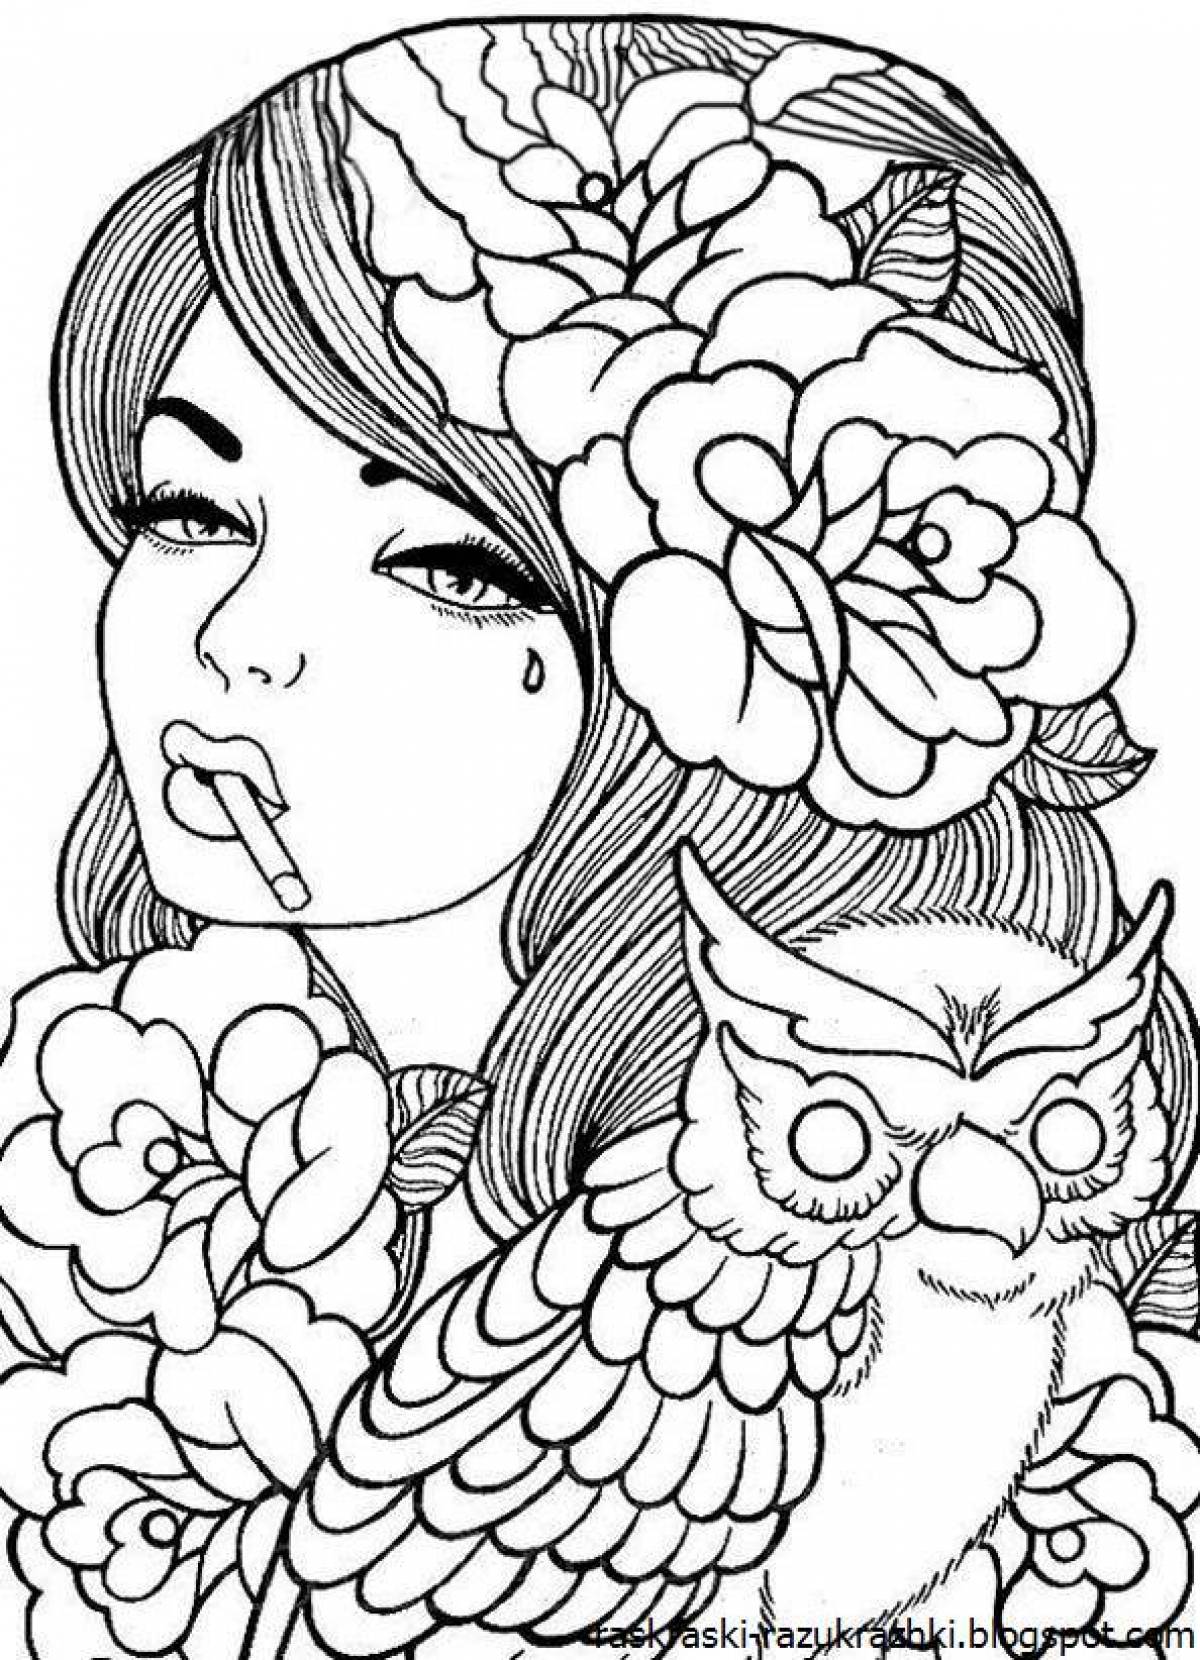 Adorable coloring book for girls 12 years old